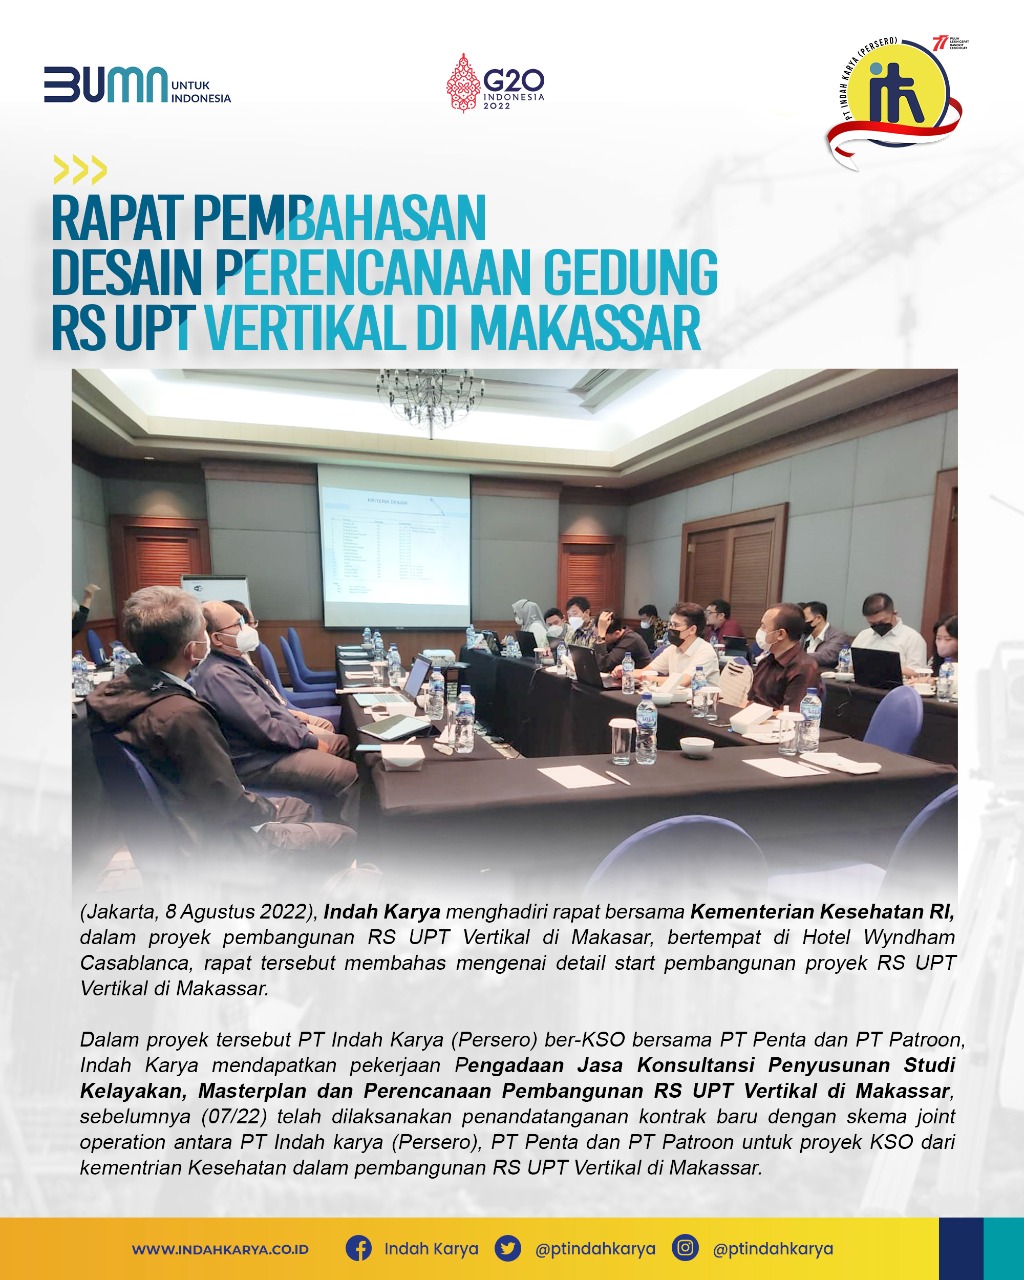 Meeting to discuss the design of the UPT Vertical Hospital building design in Makassar